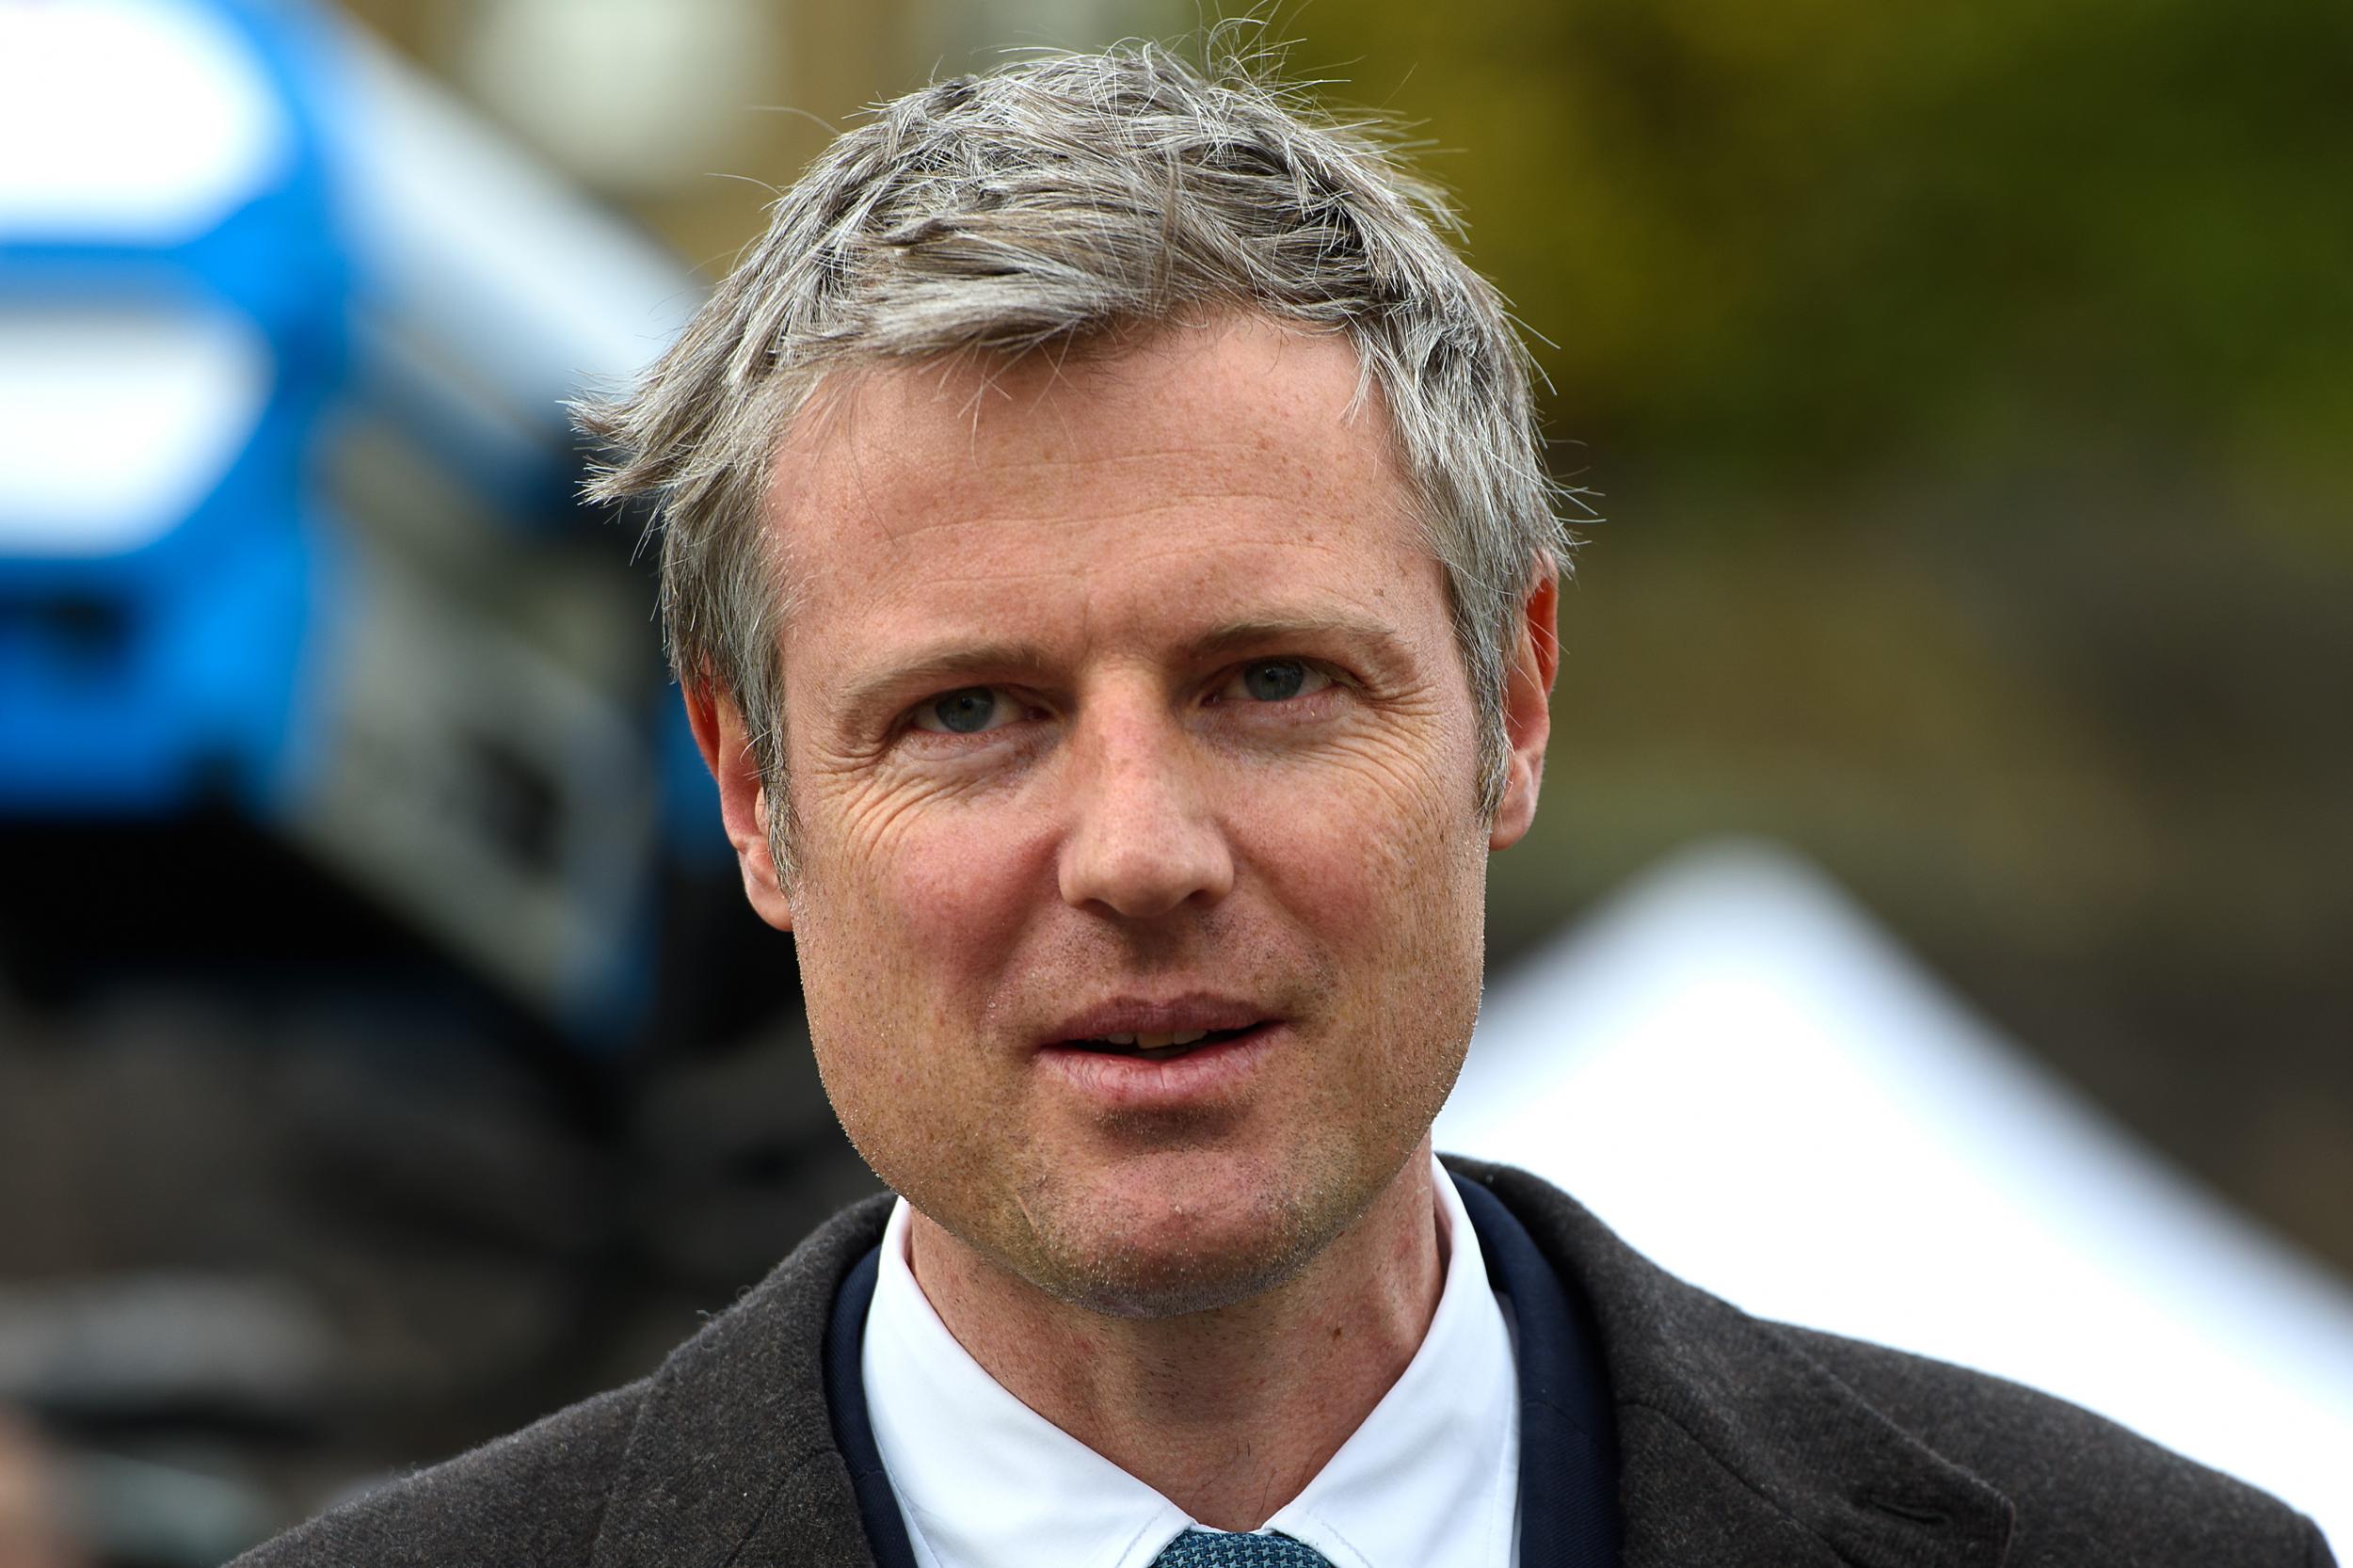 Zac Goldsmith said he would continue to campaign against Heathrow expansion